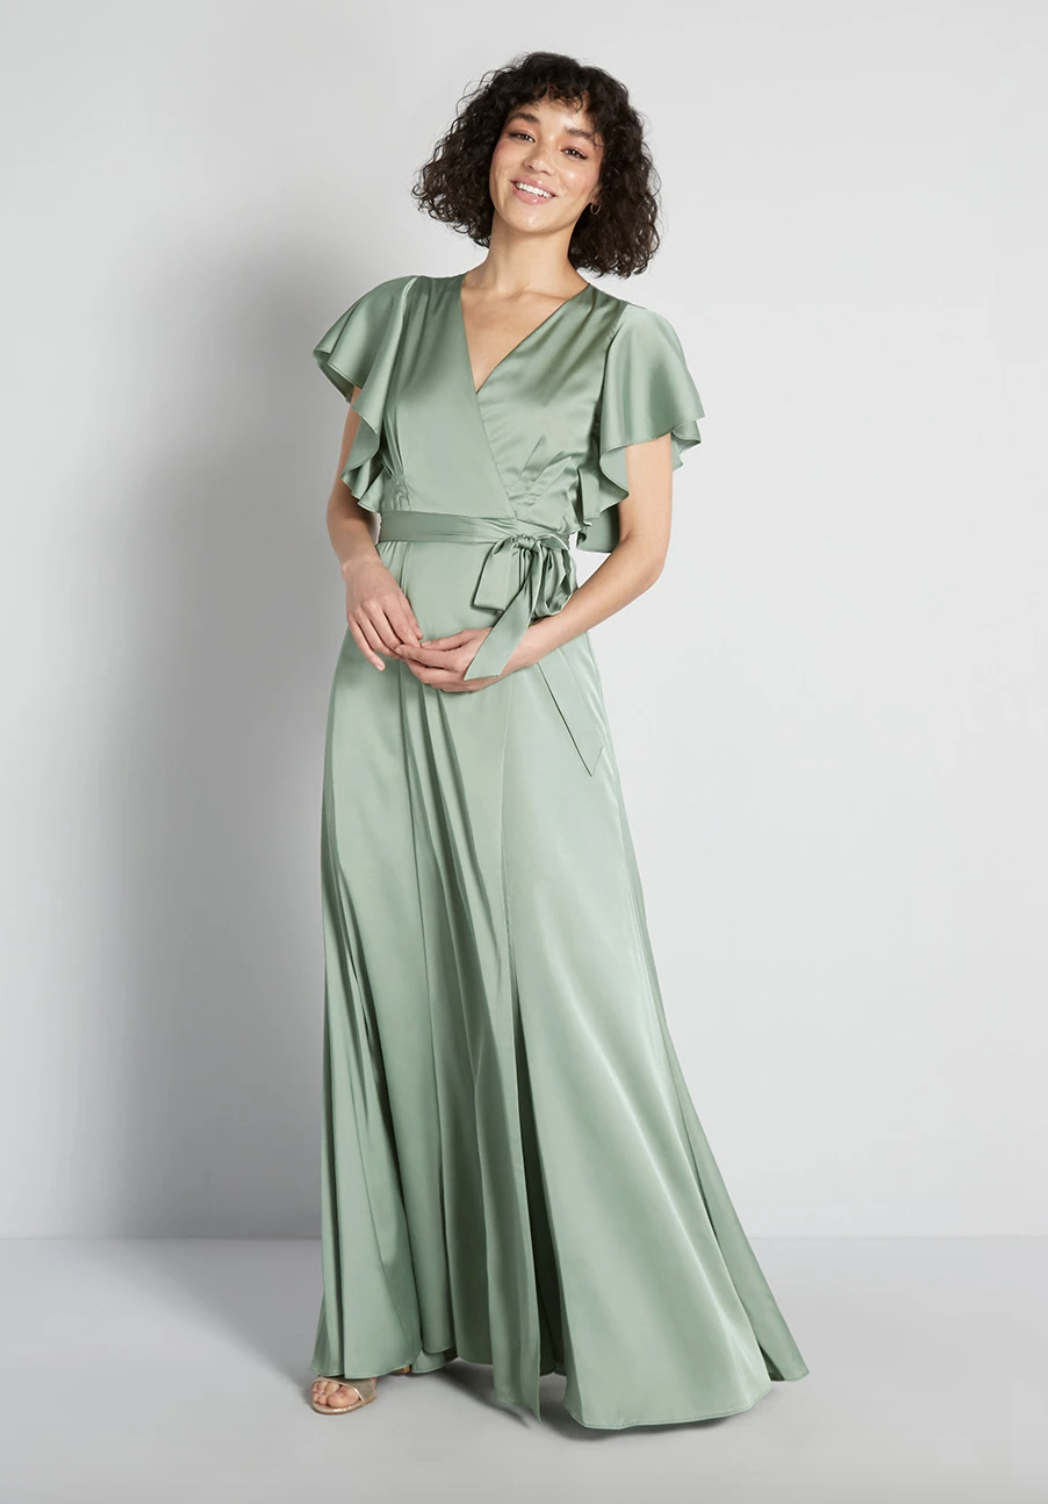 30 Fall Wedding Guest Dresses 2021—What to Wear to a Fall Wedding